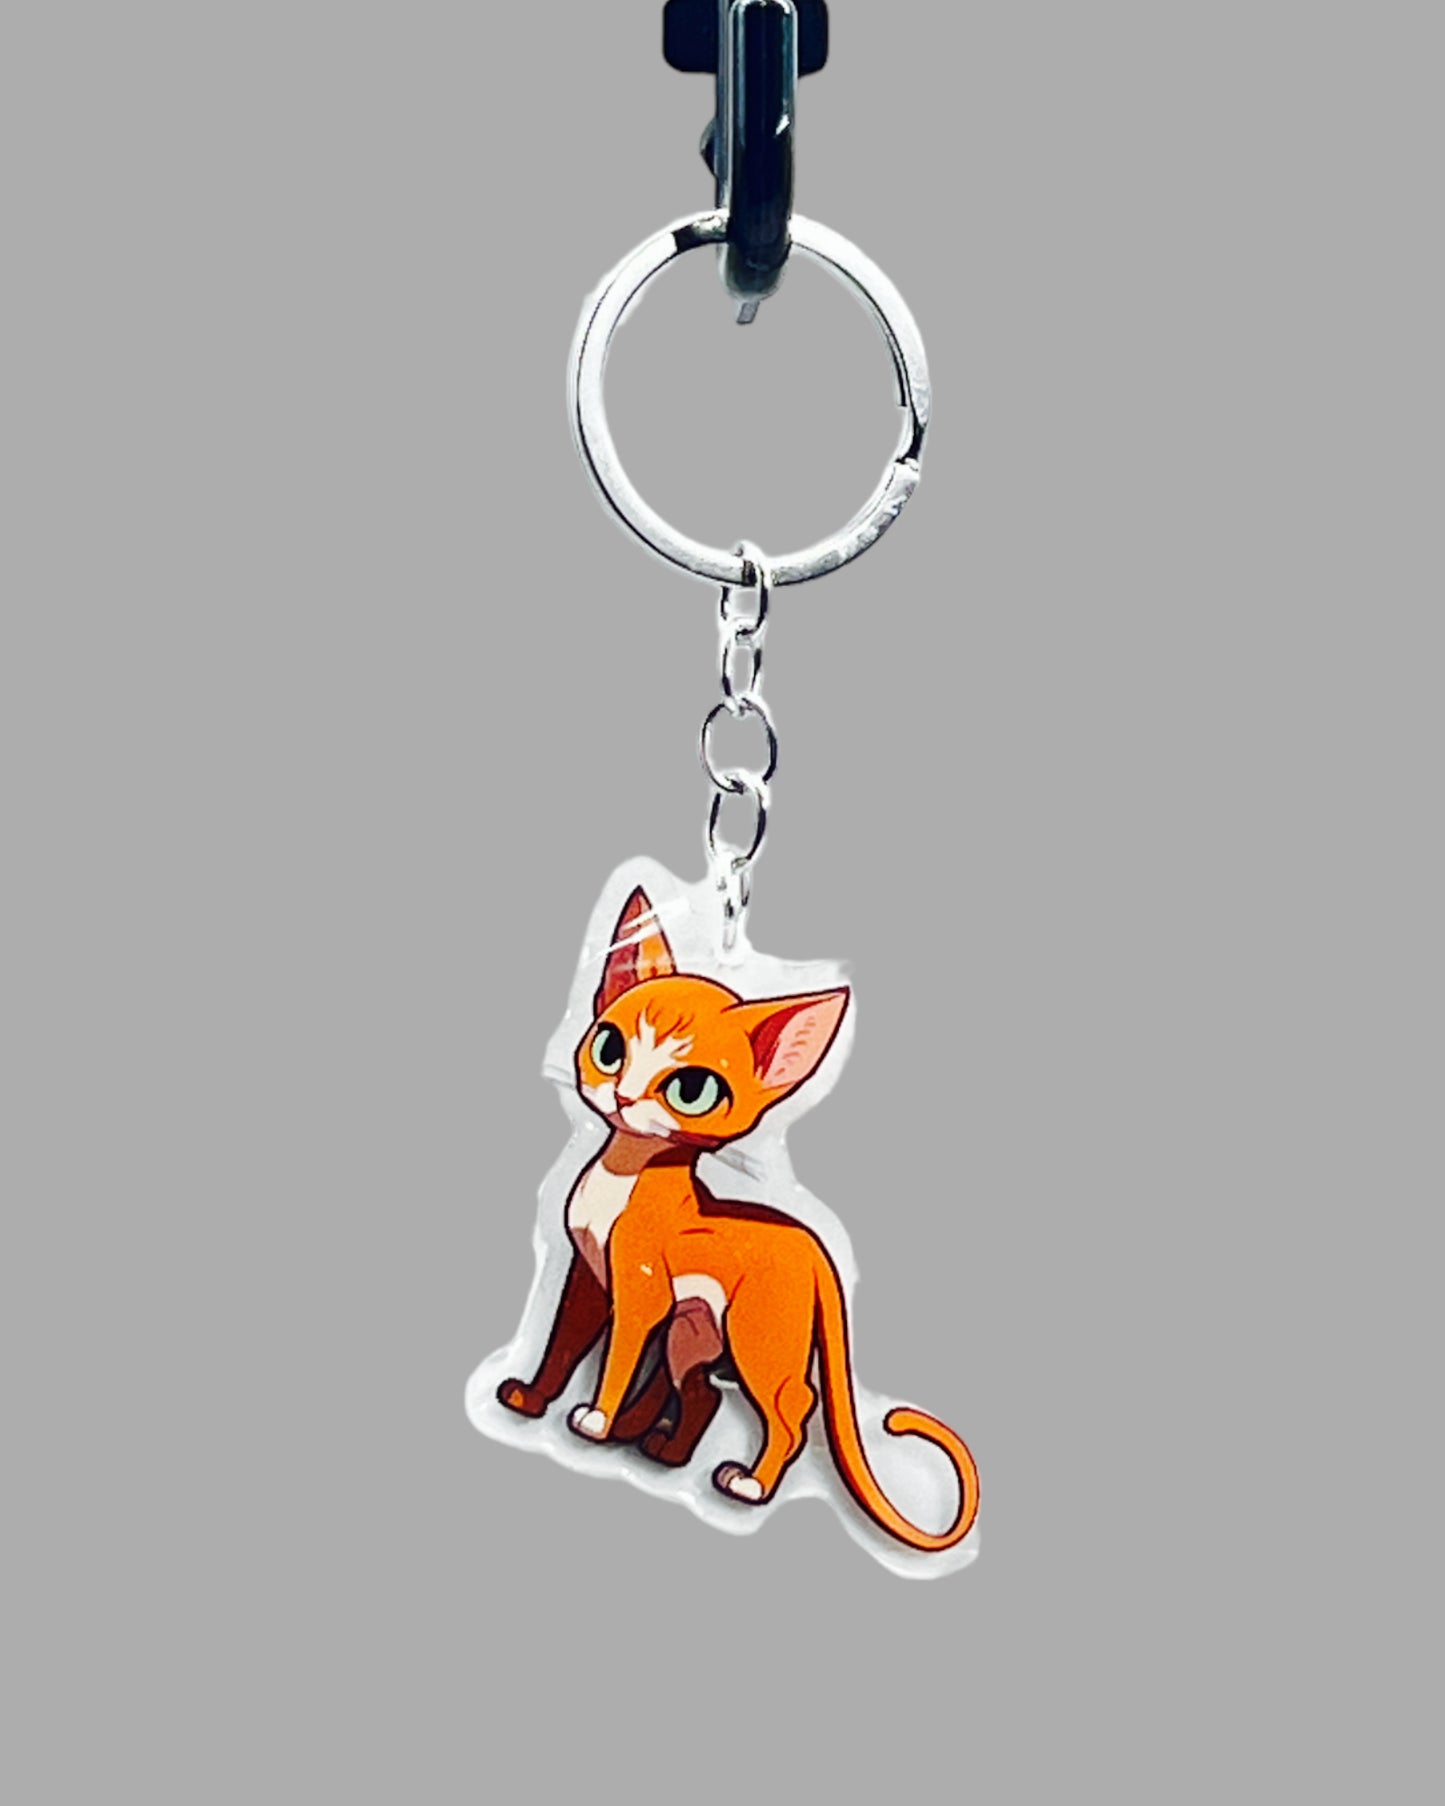 Abyssinian Cat Acrylic keychain, Cute kawaii memorial ornament, pet portrait charm gift of animal crossing, backpack photo fob or dad car décor